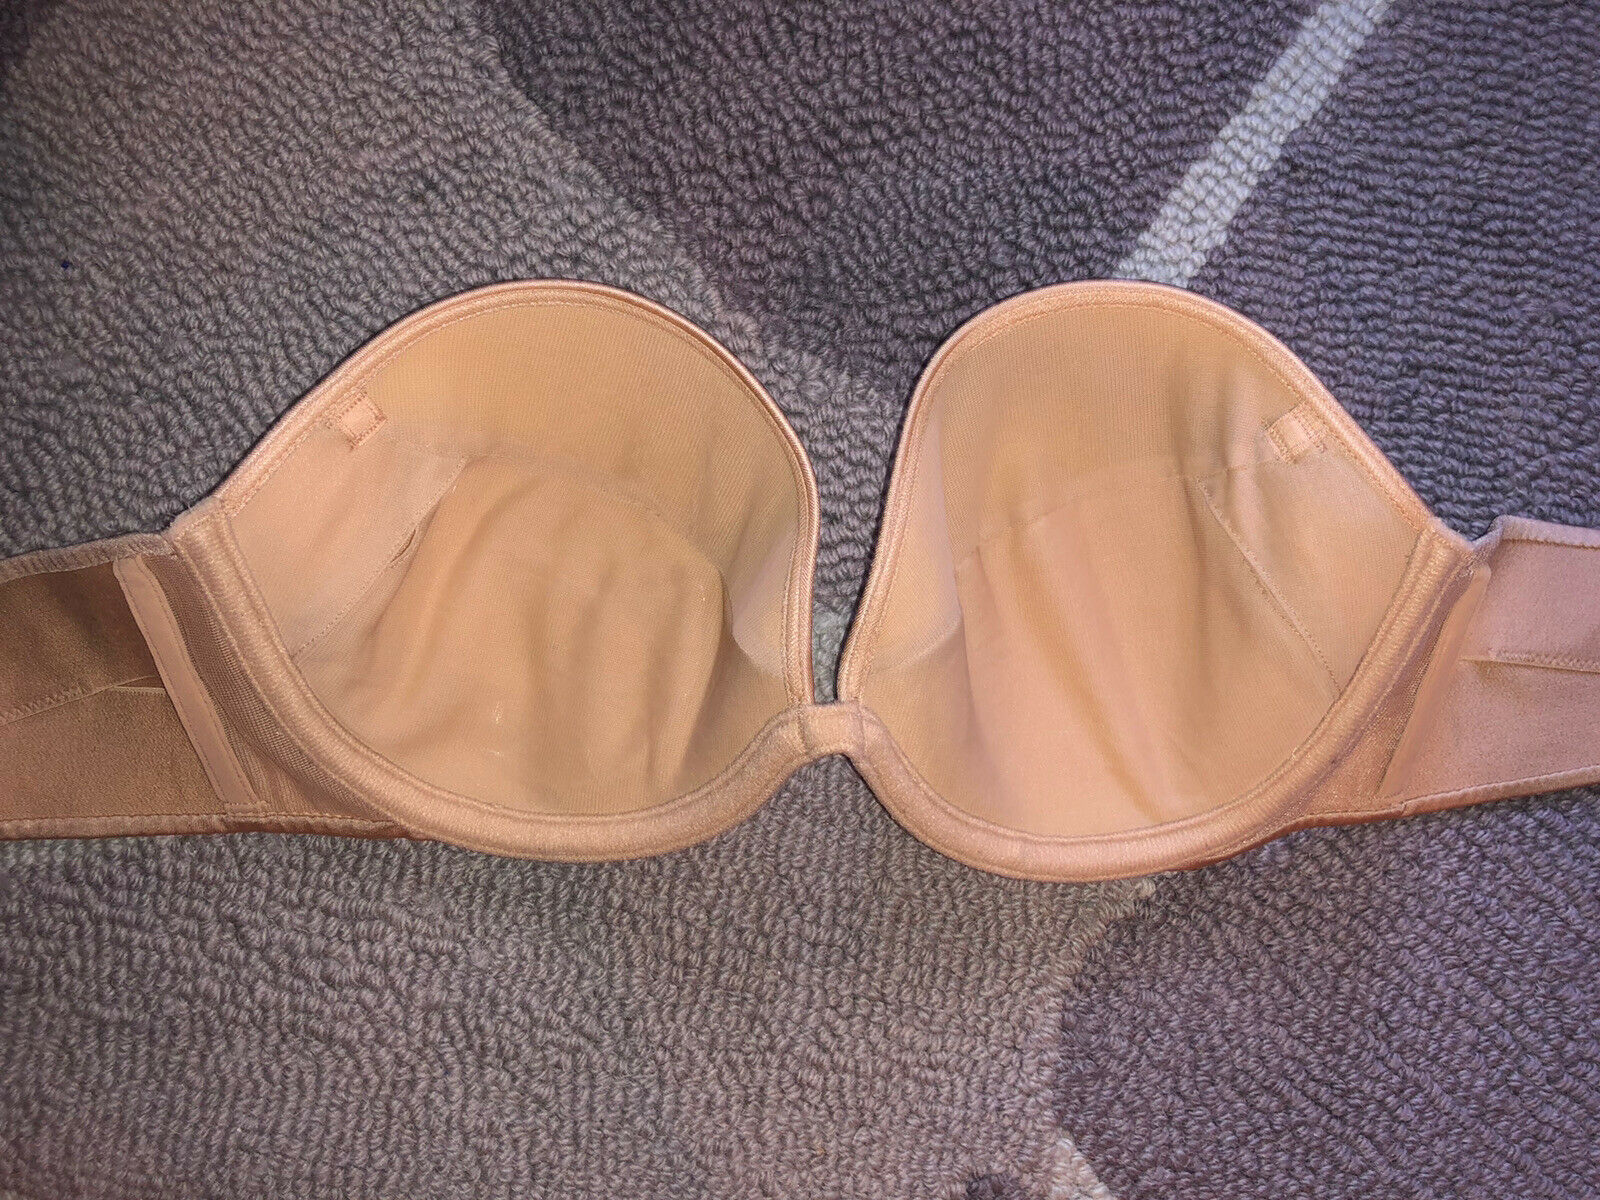 Incredible By Victorias Secret 36DD Padded No Wire Bra Solid Beige